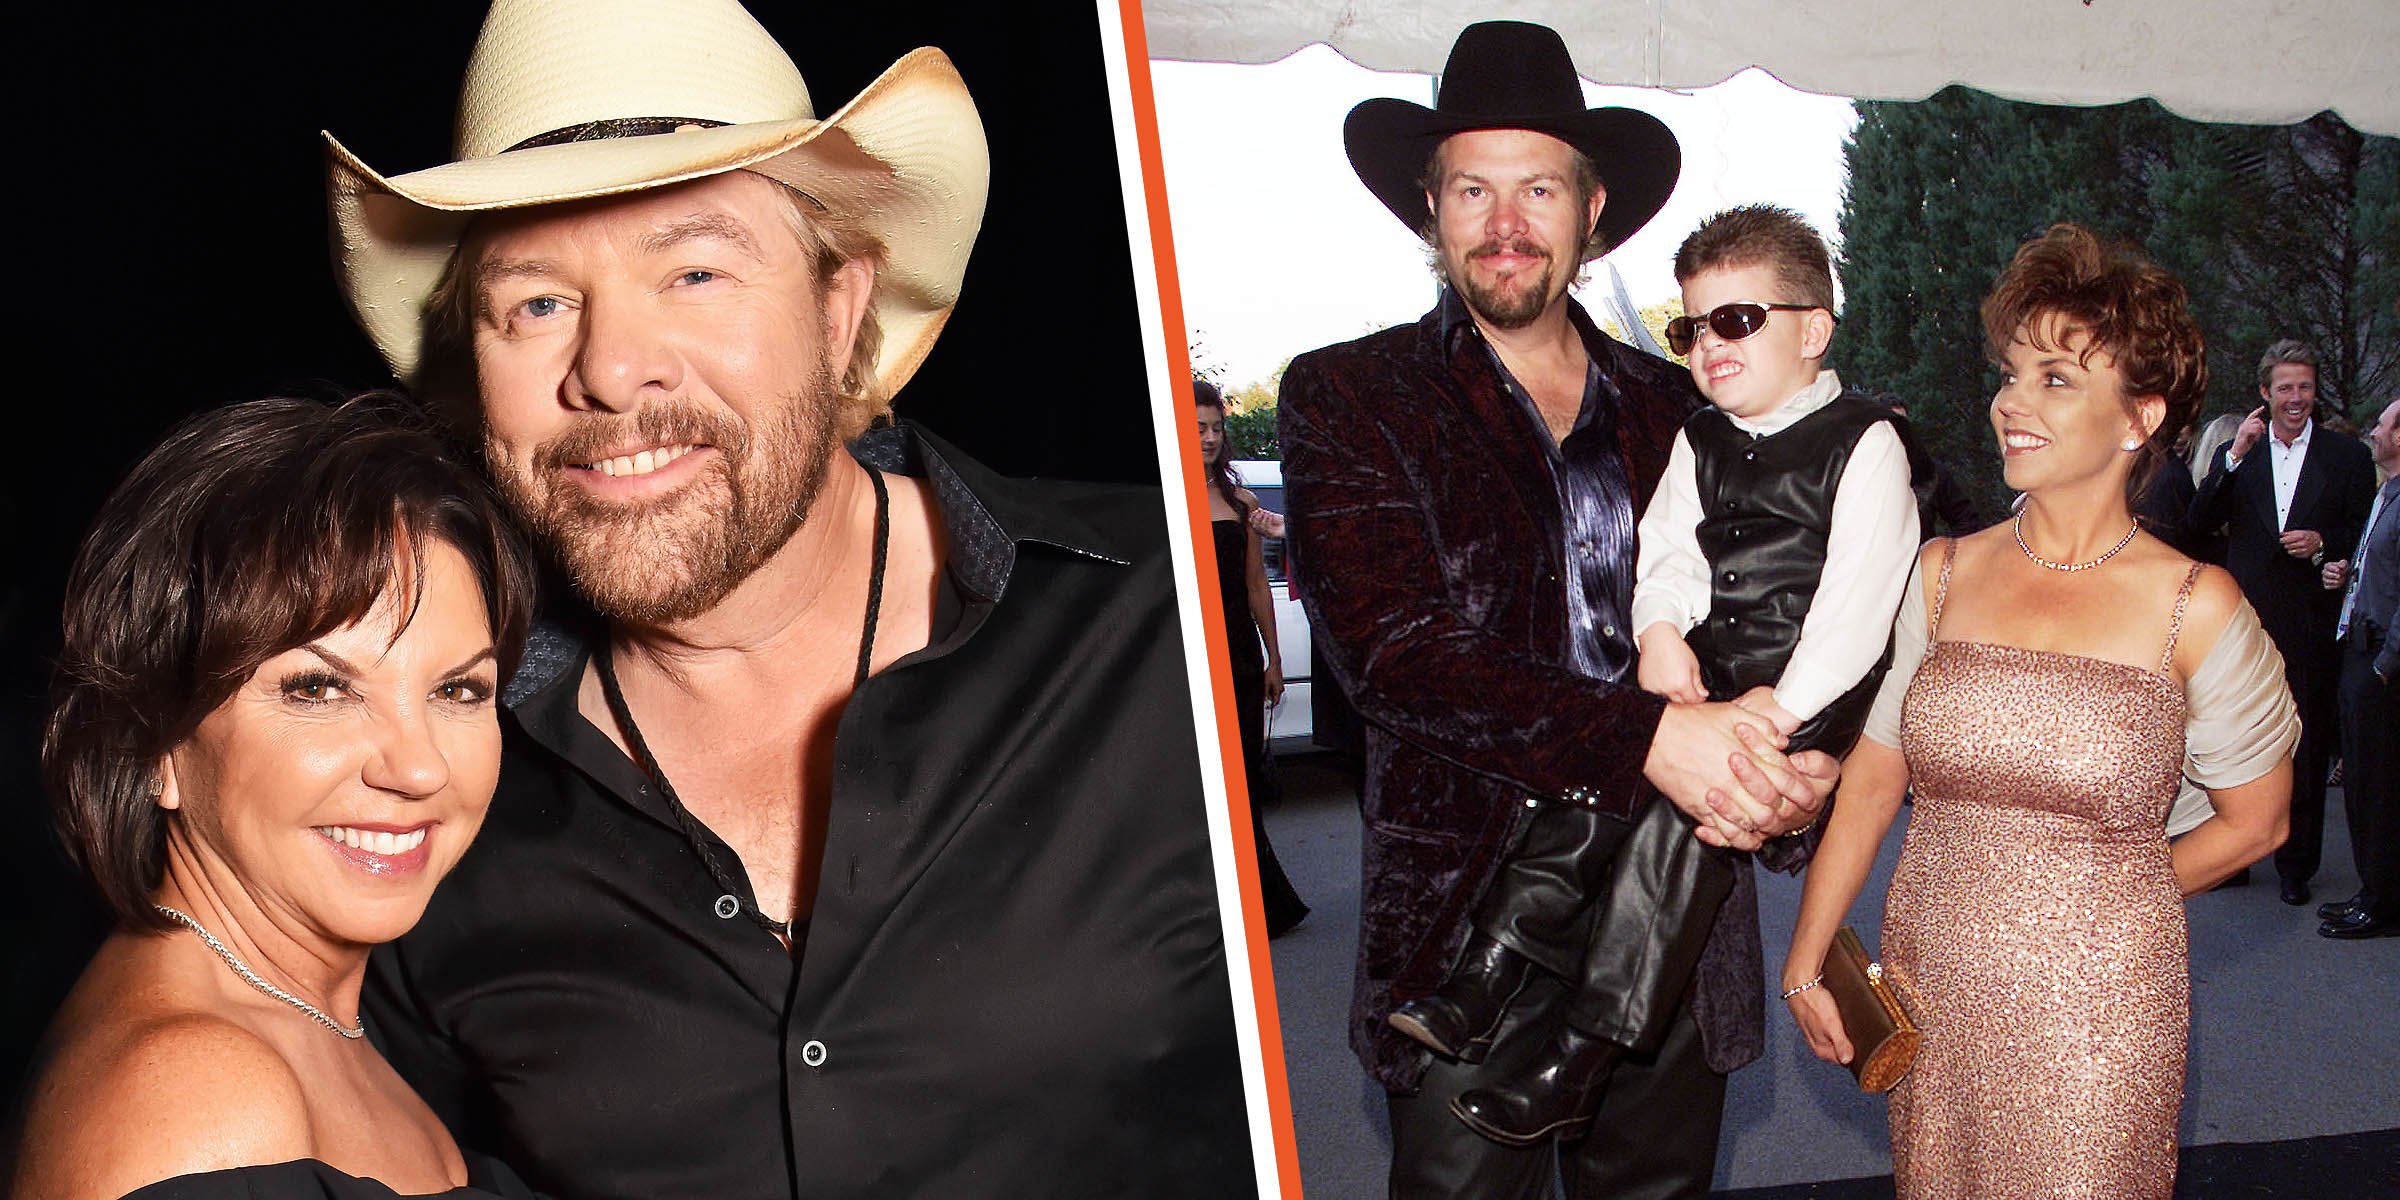 Toby Keith Was a 'Larger-Than-Life Guy' & Charmed His 'Strong-Hearted and Loving' Wife of 38 Years on 1st Date